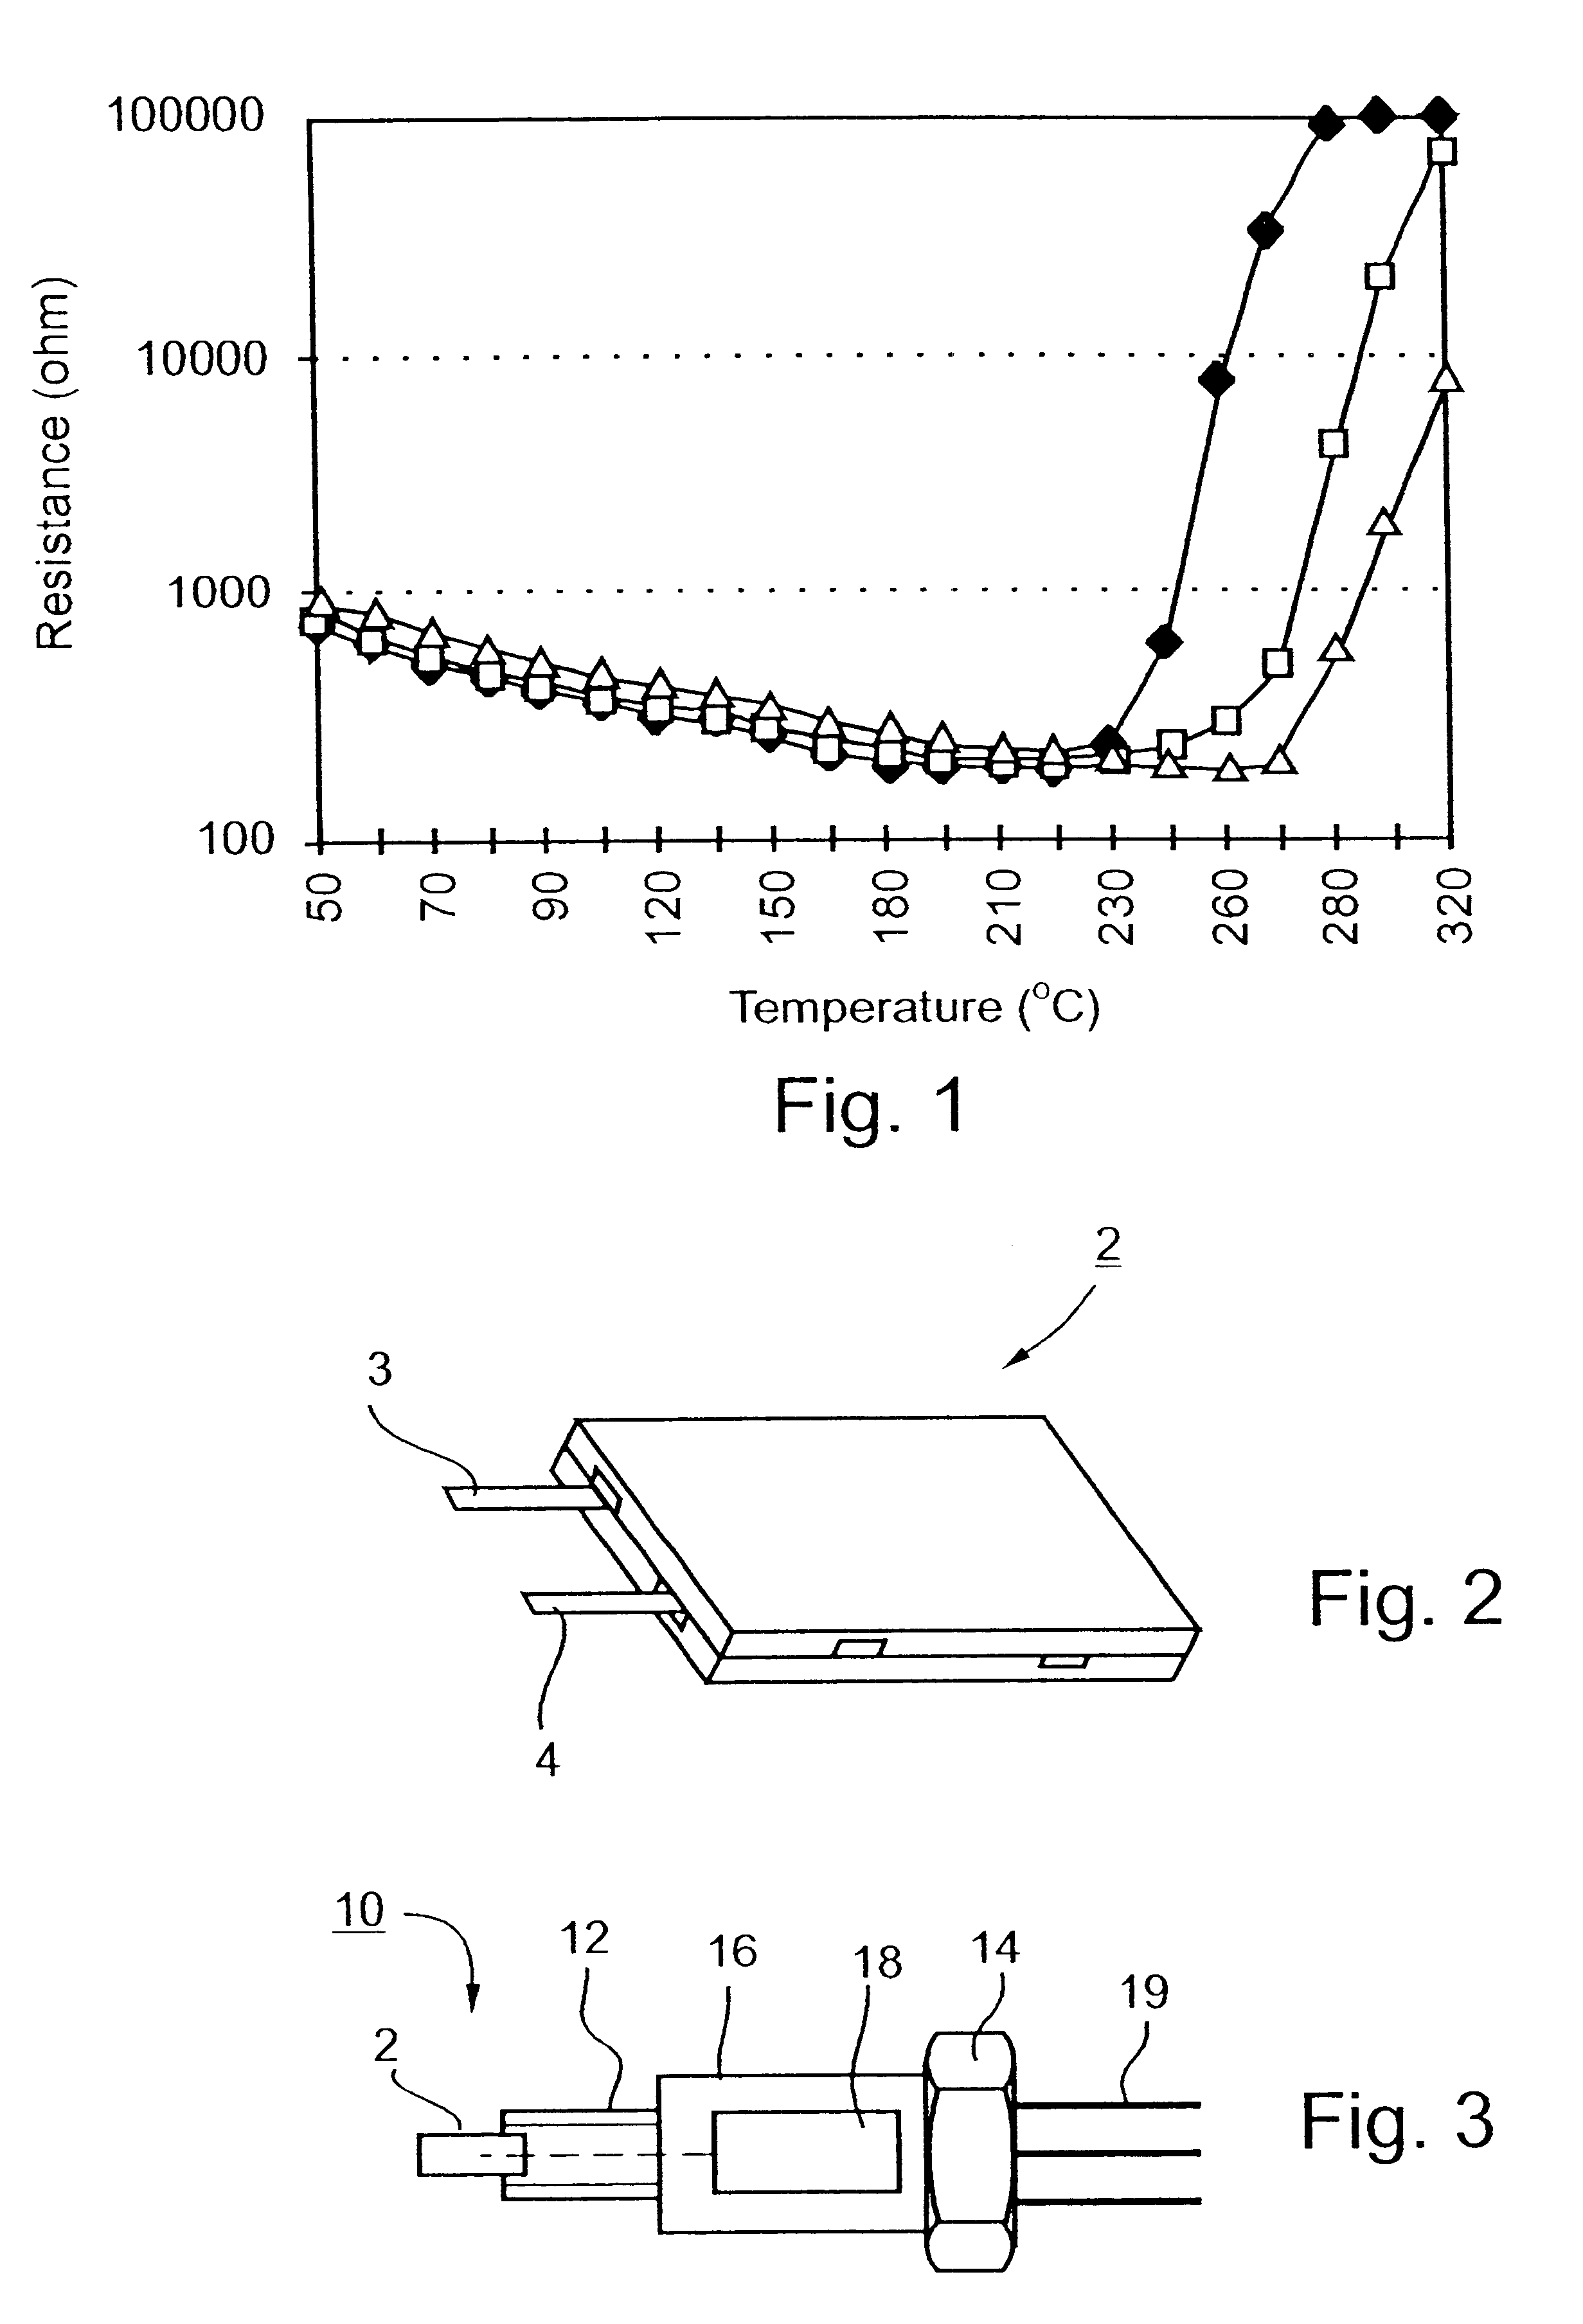 Method and apparatus for providing an indication of the composition of a fluid particularly useful in heat pumps and vaporizers